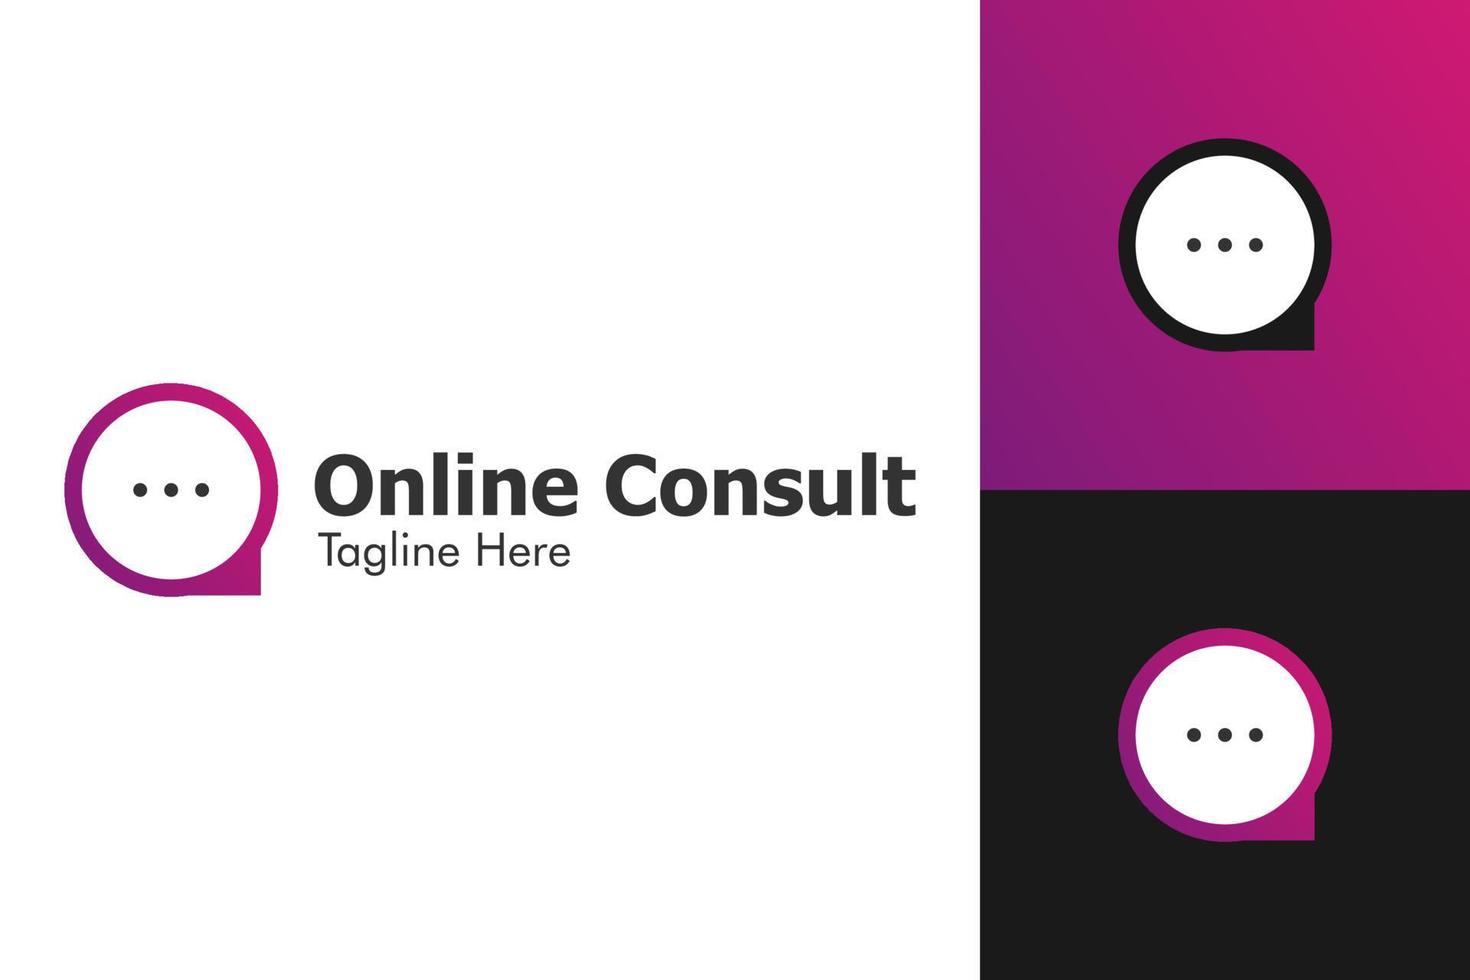 Illustration Vector Graphic of Online Consult Logo. Perfect to use for Technology Company